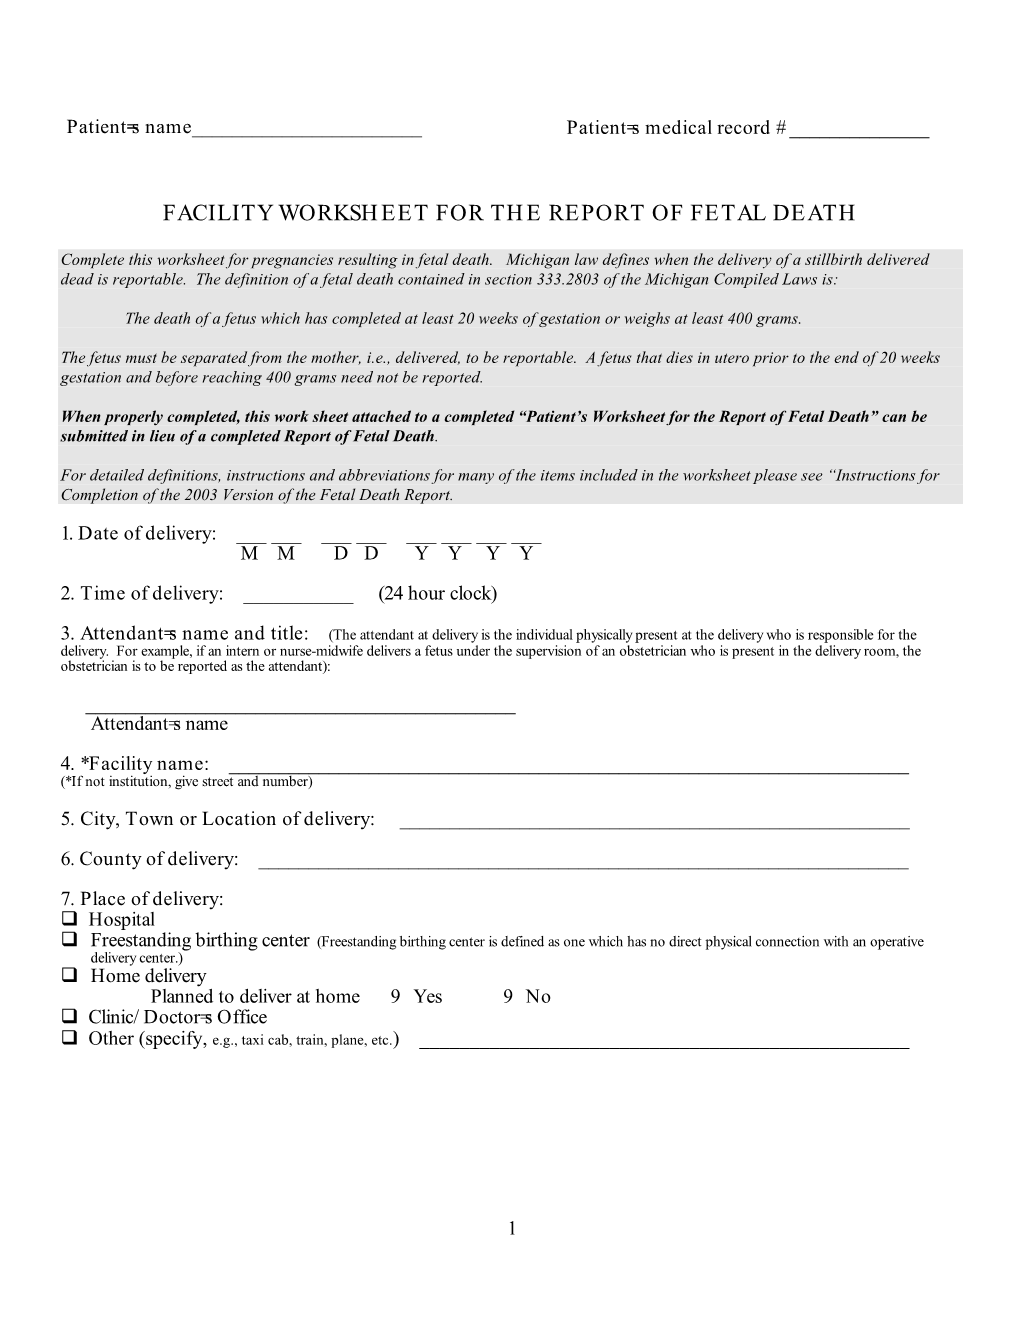 Facility Worksheet for the Report of Fetal Death